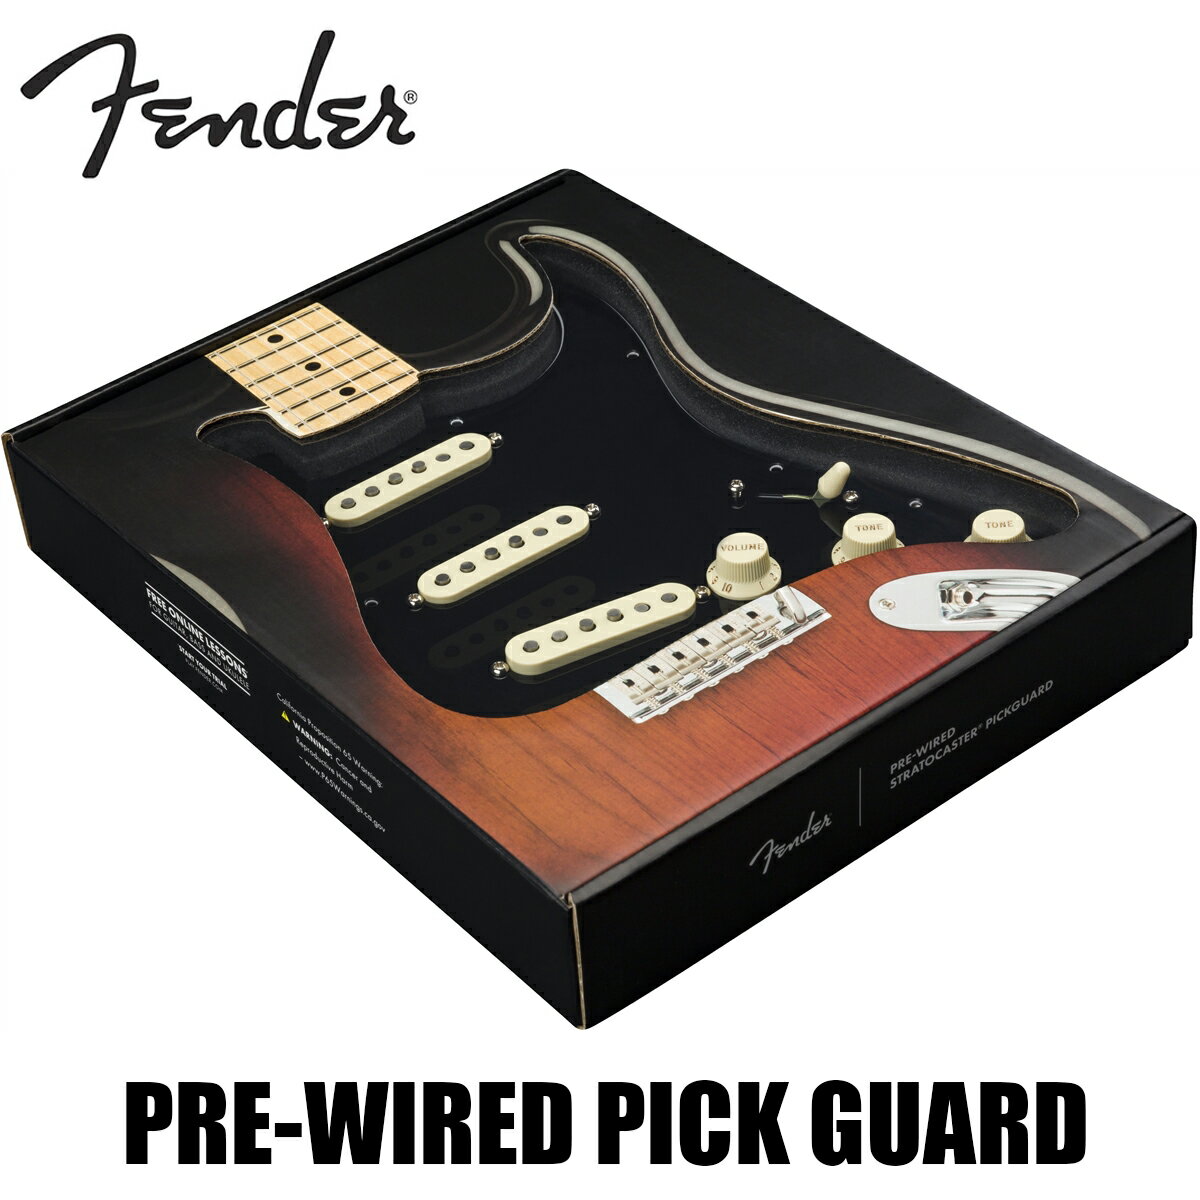 Fender Pre-Wired Strat Pickguard Texas Special SSS -Black / 11 Hole PG- 新品[フェンダー][ピックガード][ギターパーツ,リプレイスメントパーツ]